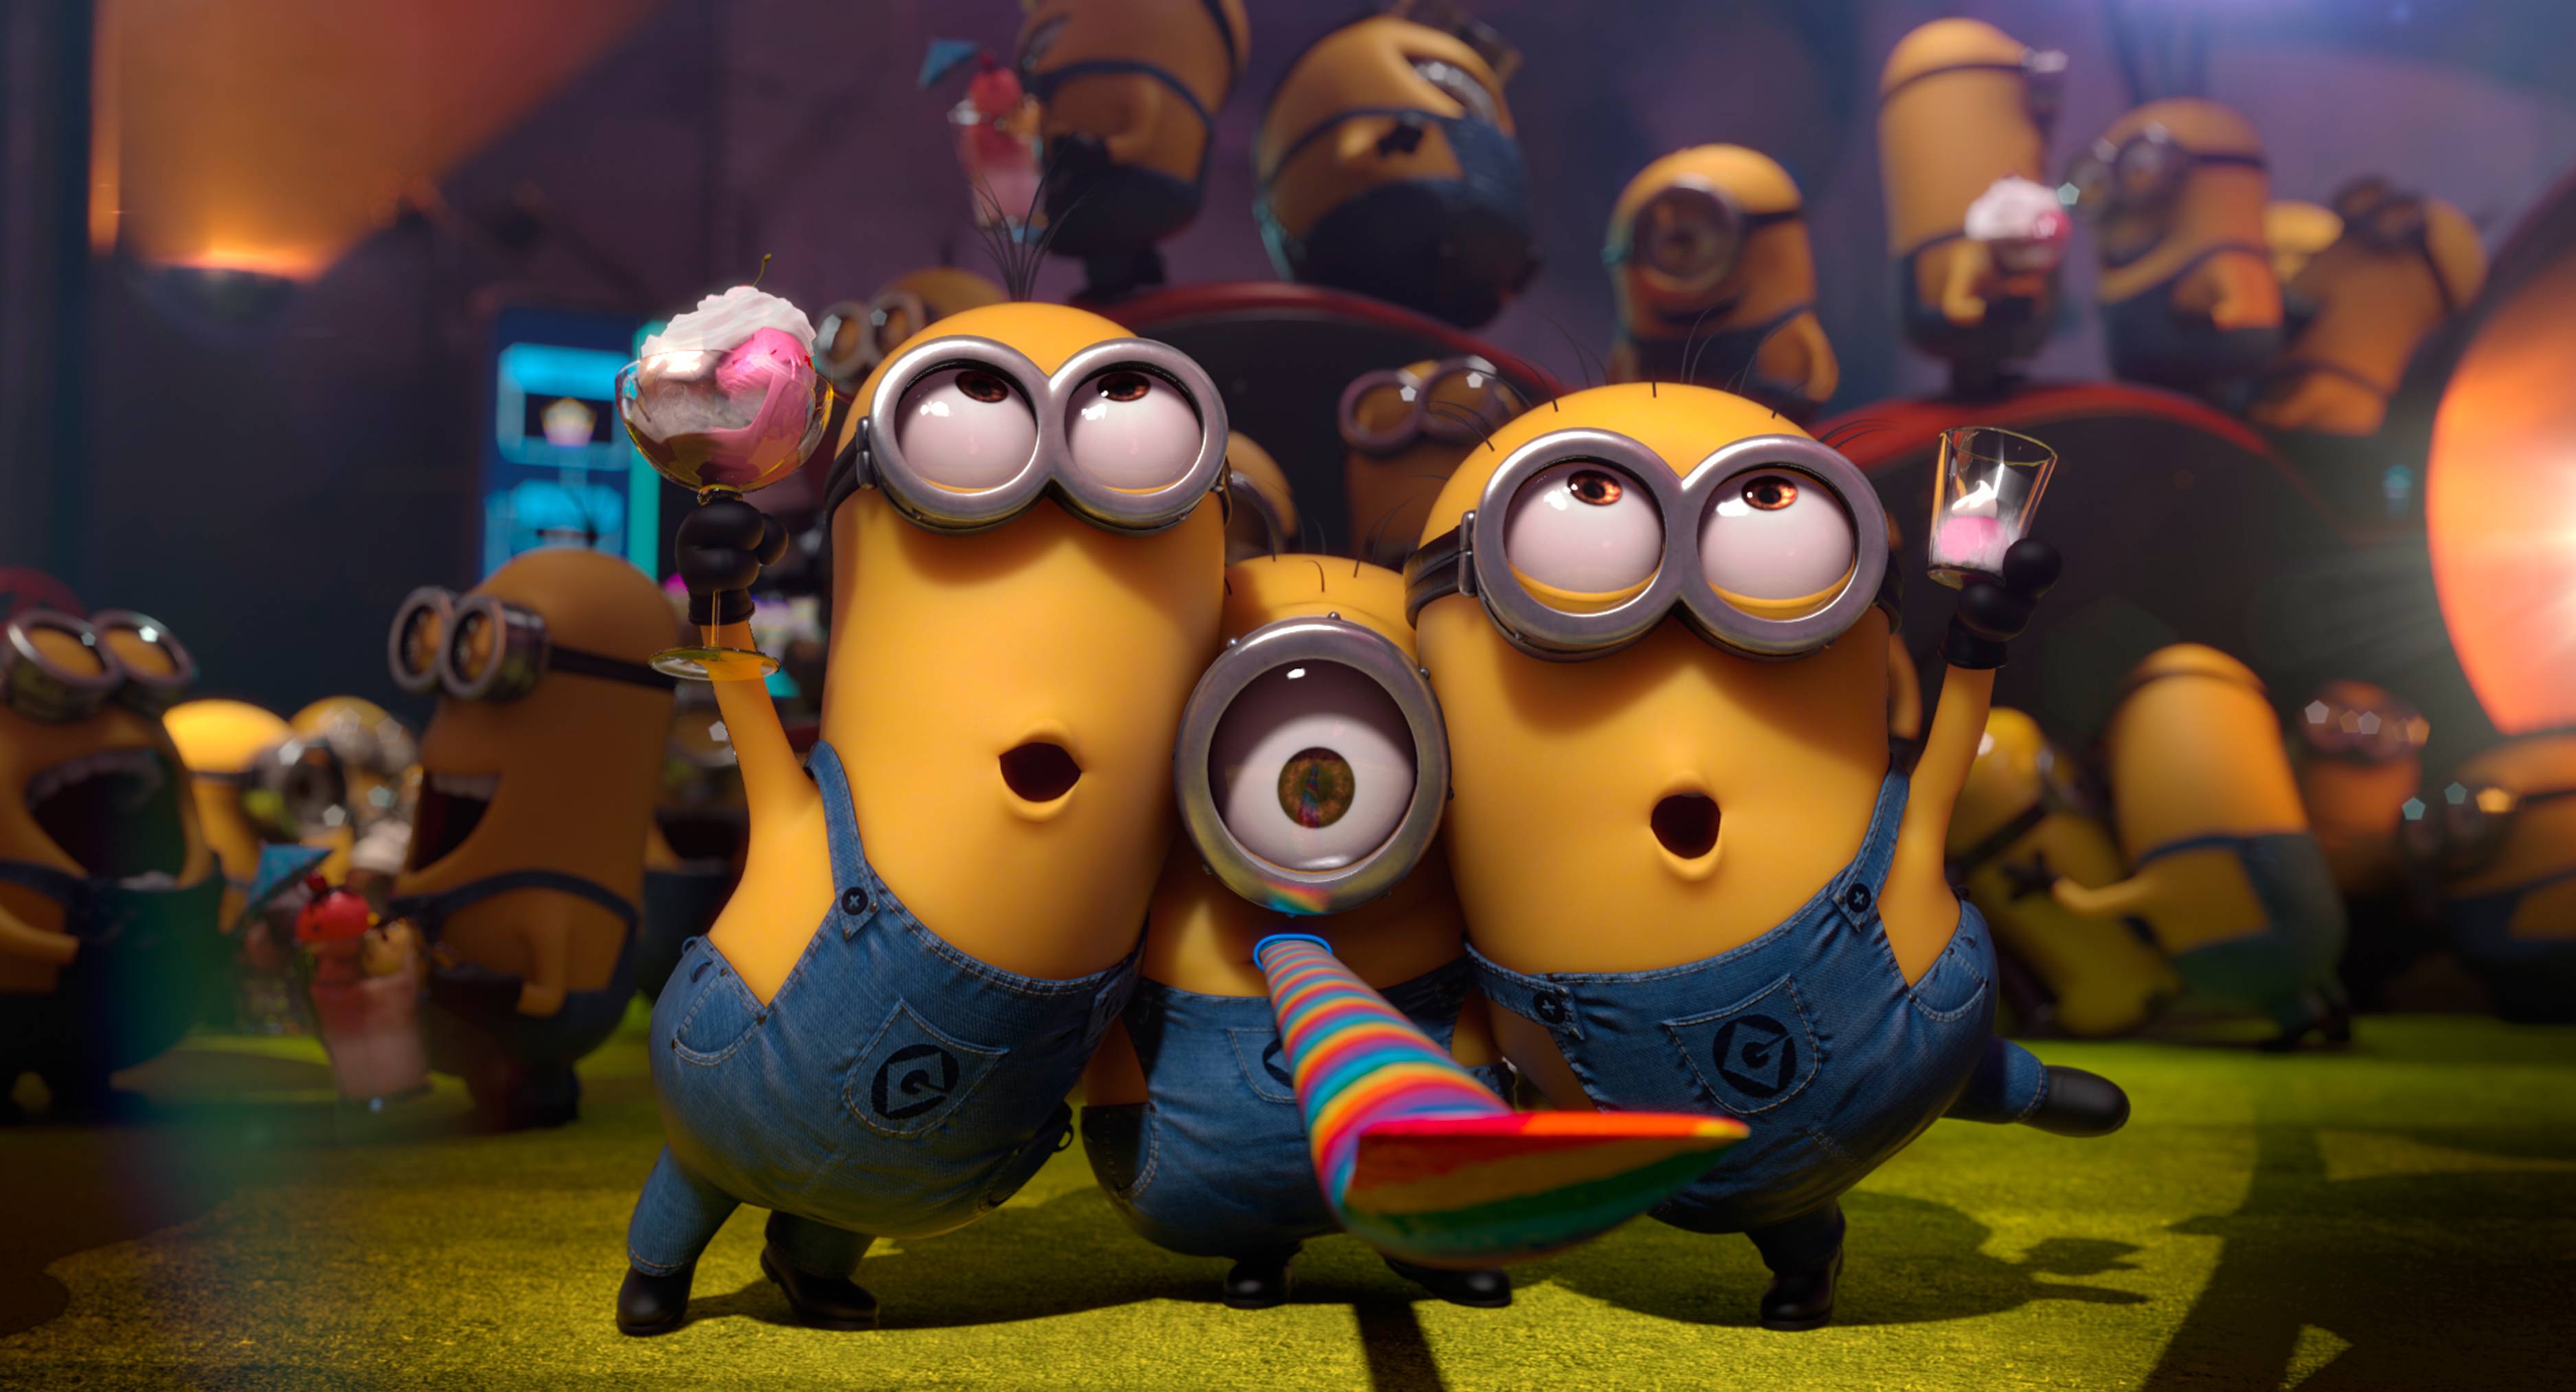 hd wallpapers of minions